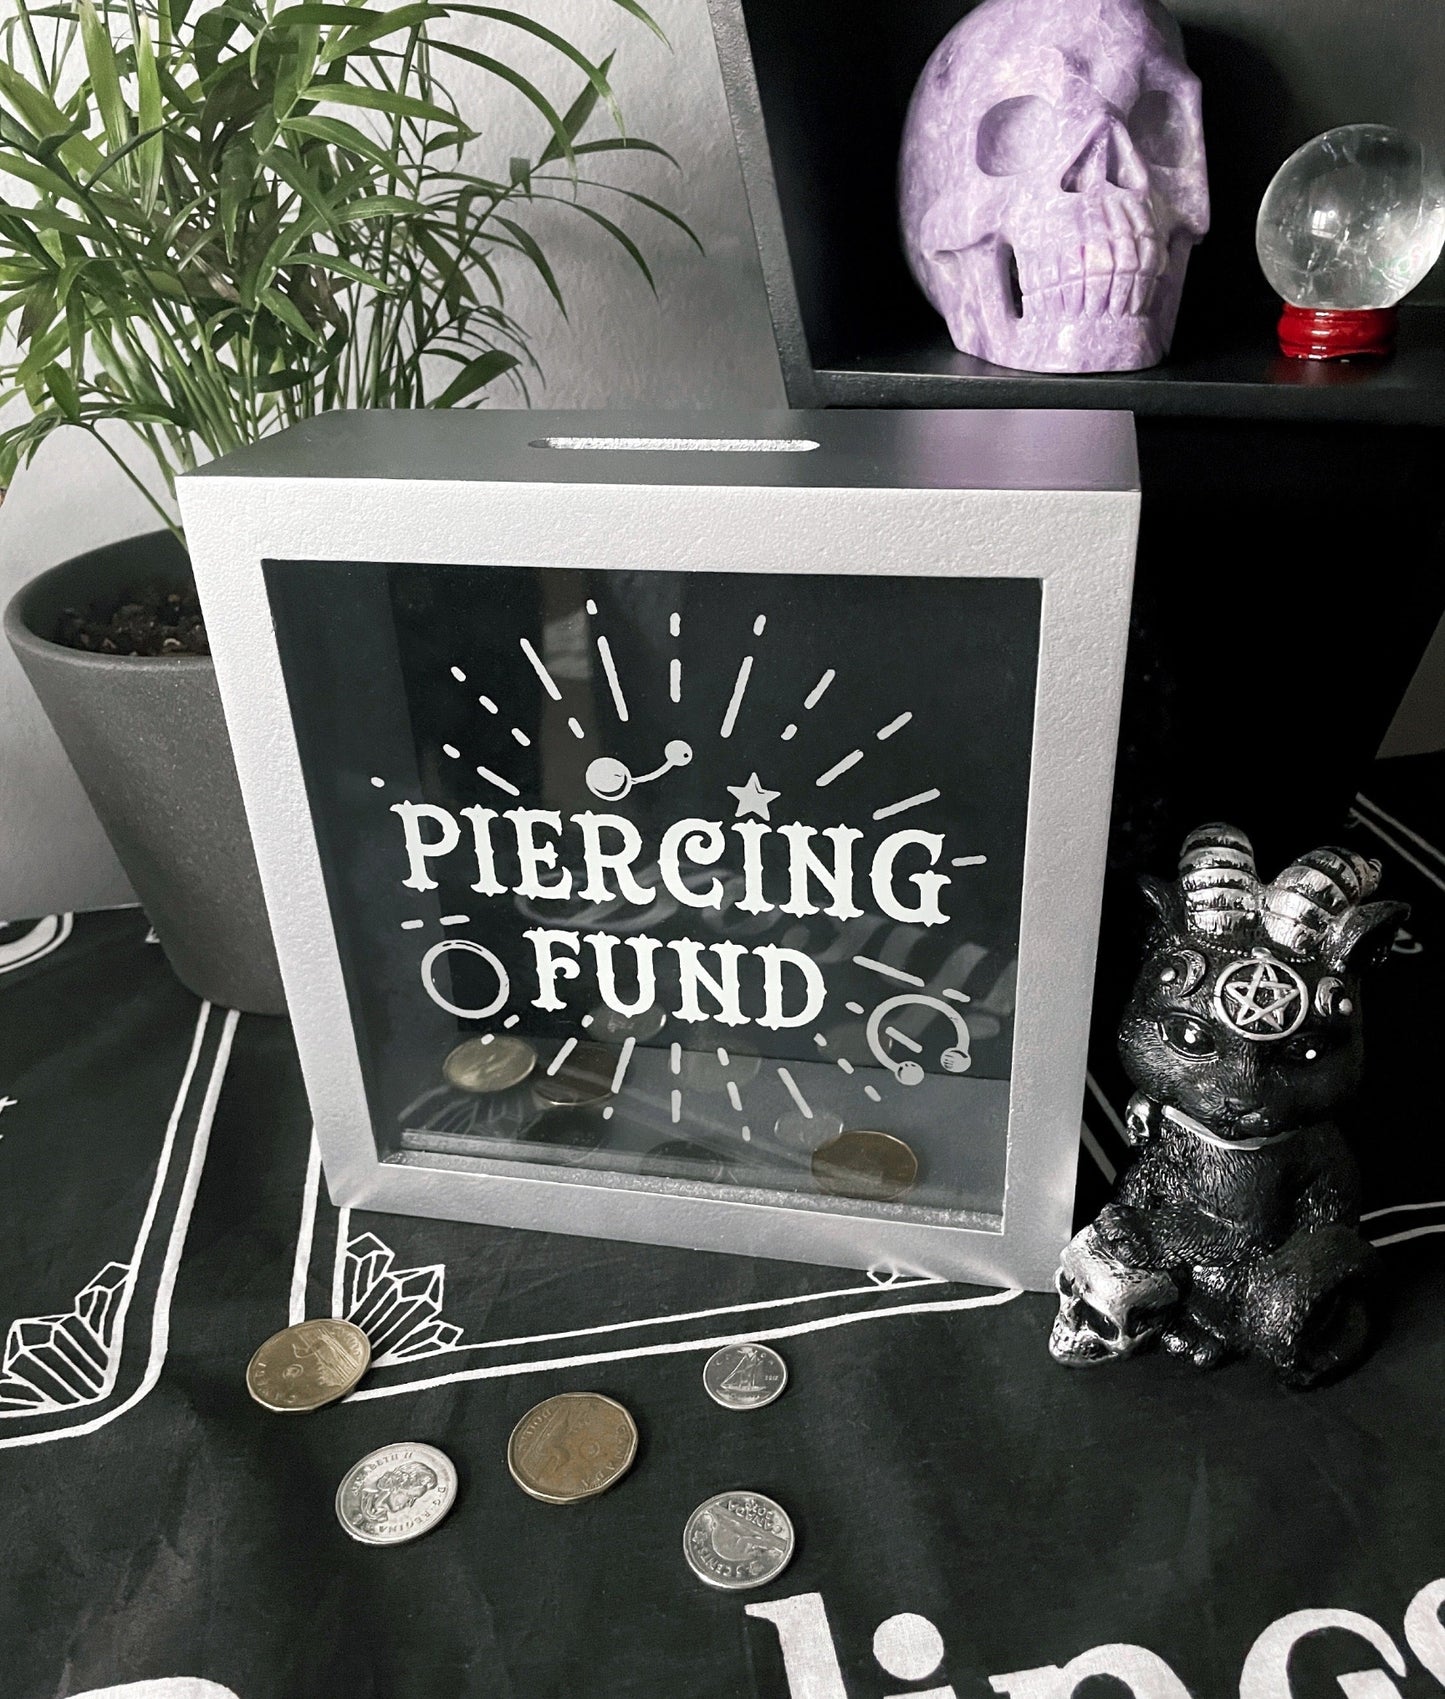 Pictured is a piggy bank or money box with the words "piercing fund" on the front.